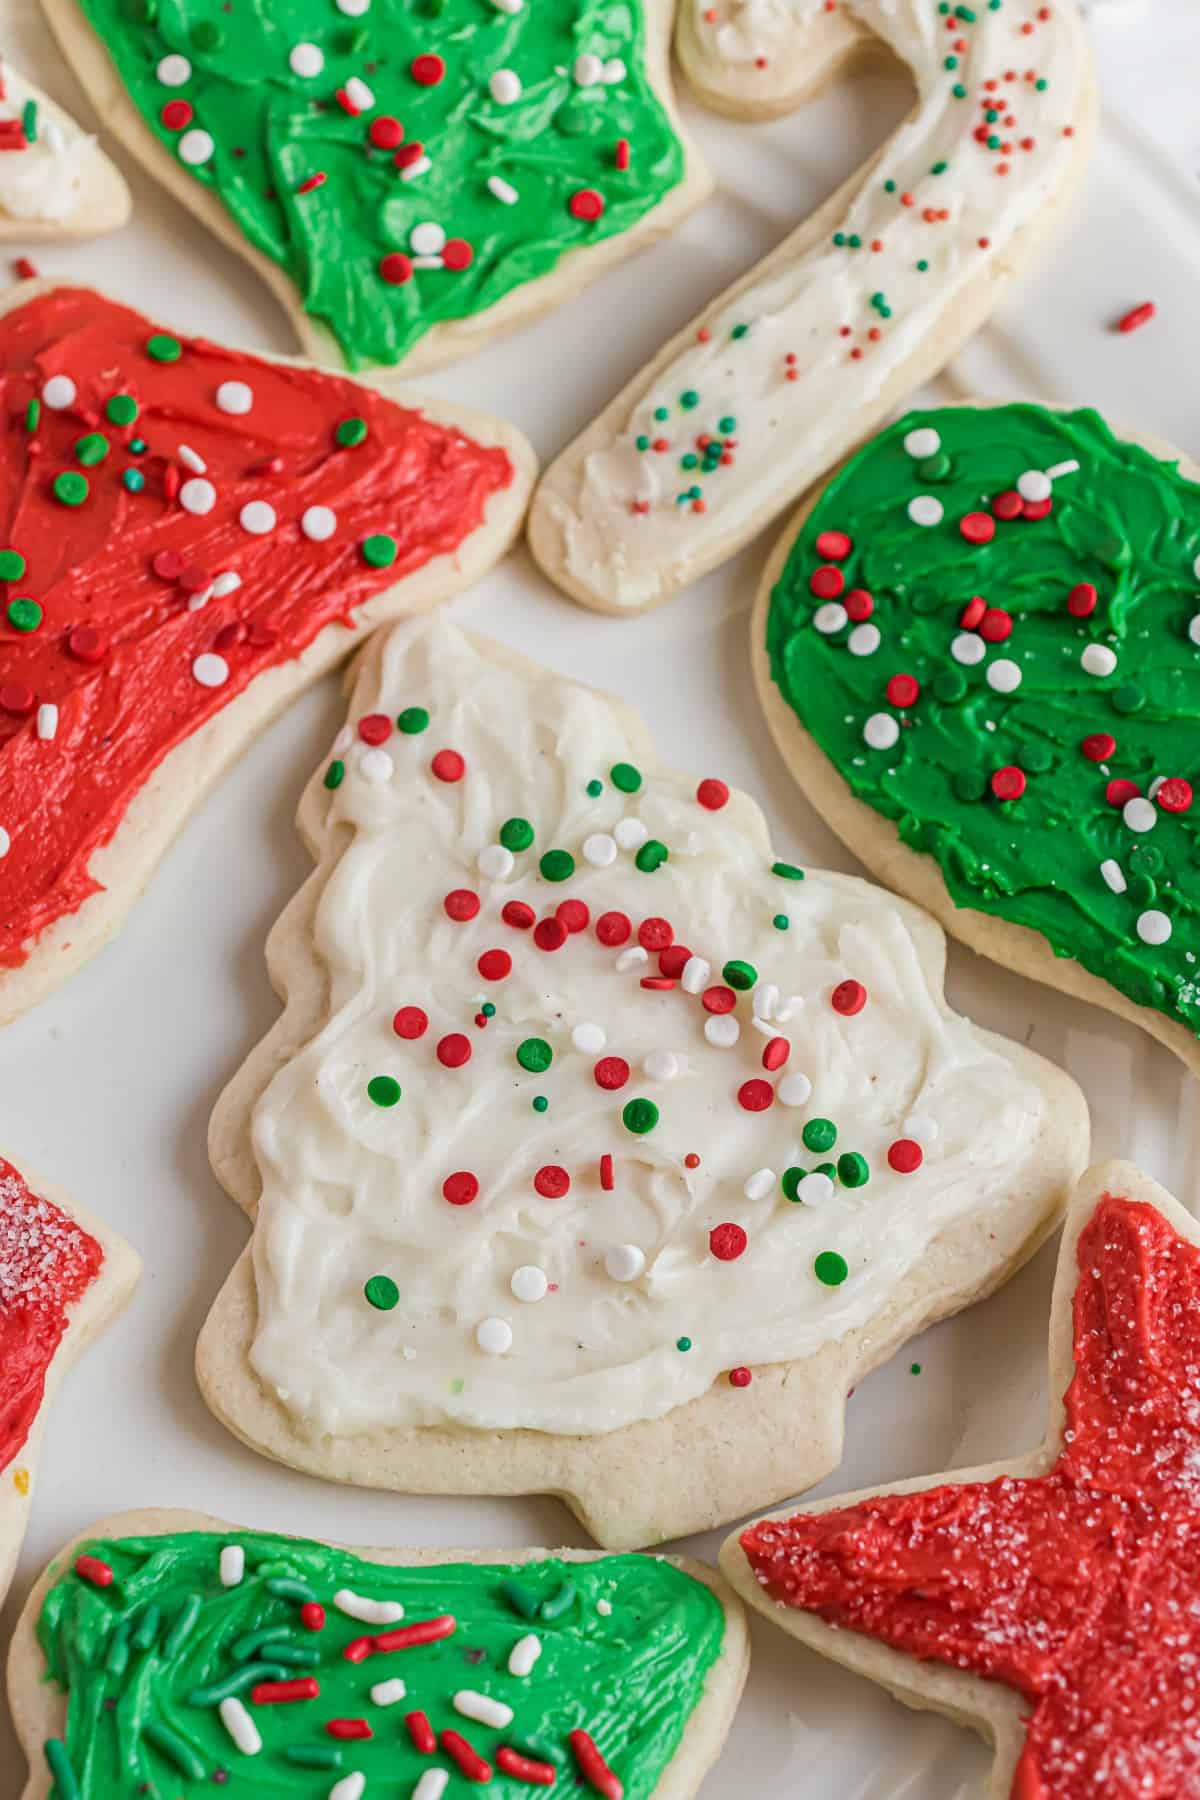 Christmas shaped sugar cookies with colorful frosting and sprinkles.